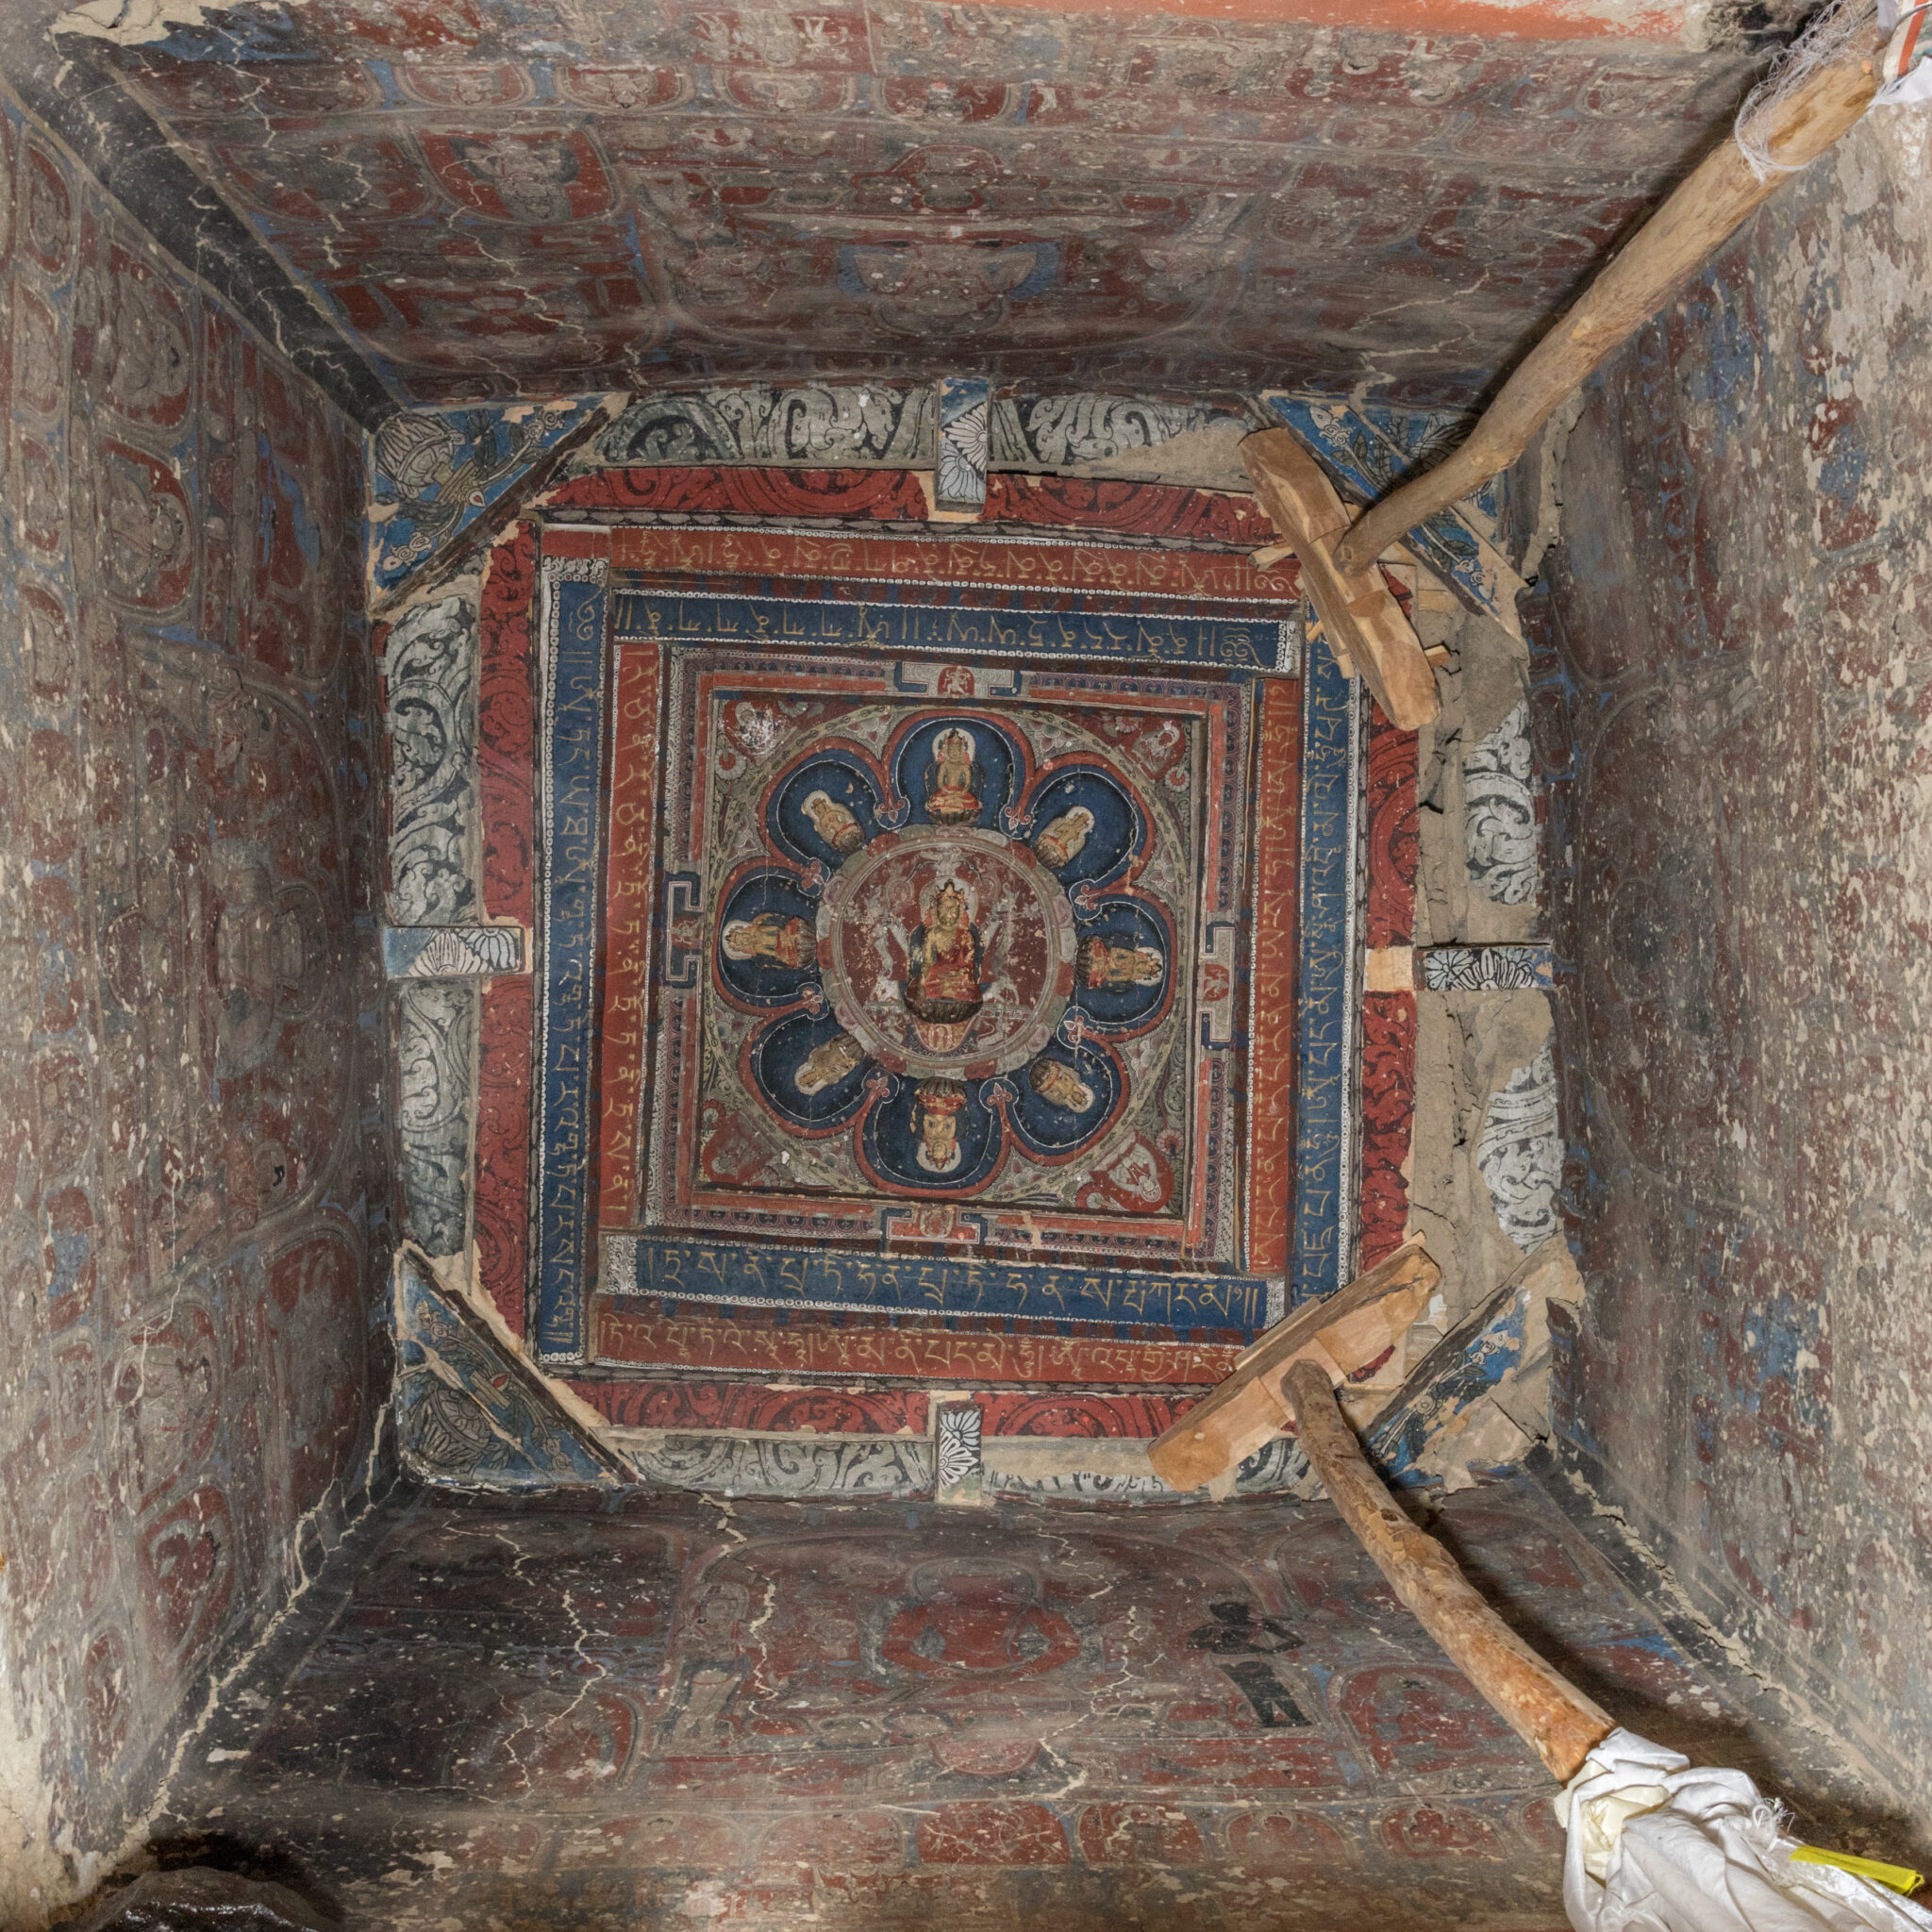 View from below of wooden mandala affixed to ceiling of square chamber with muraled walls